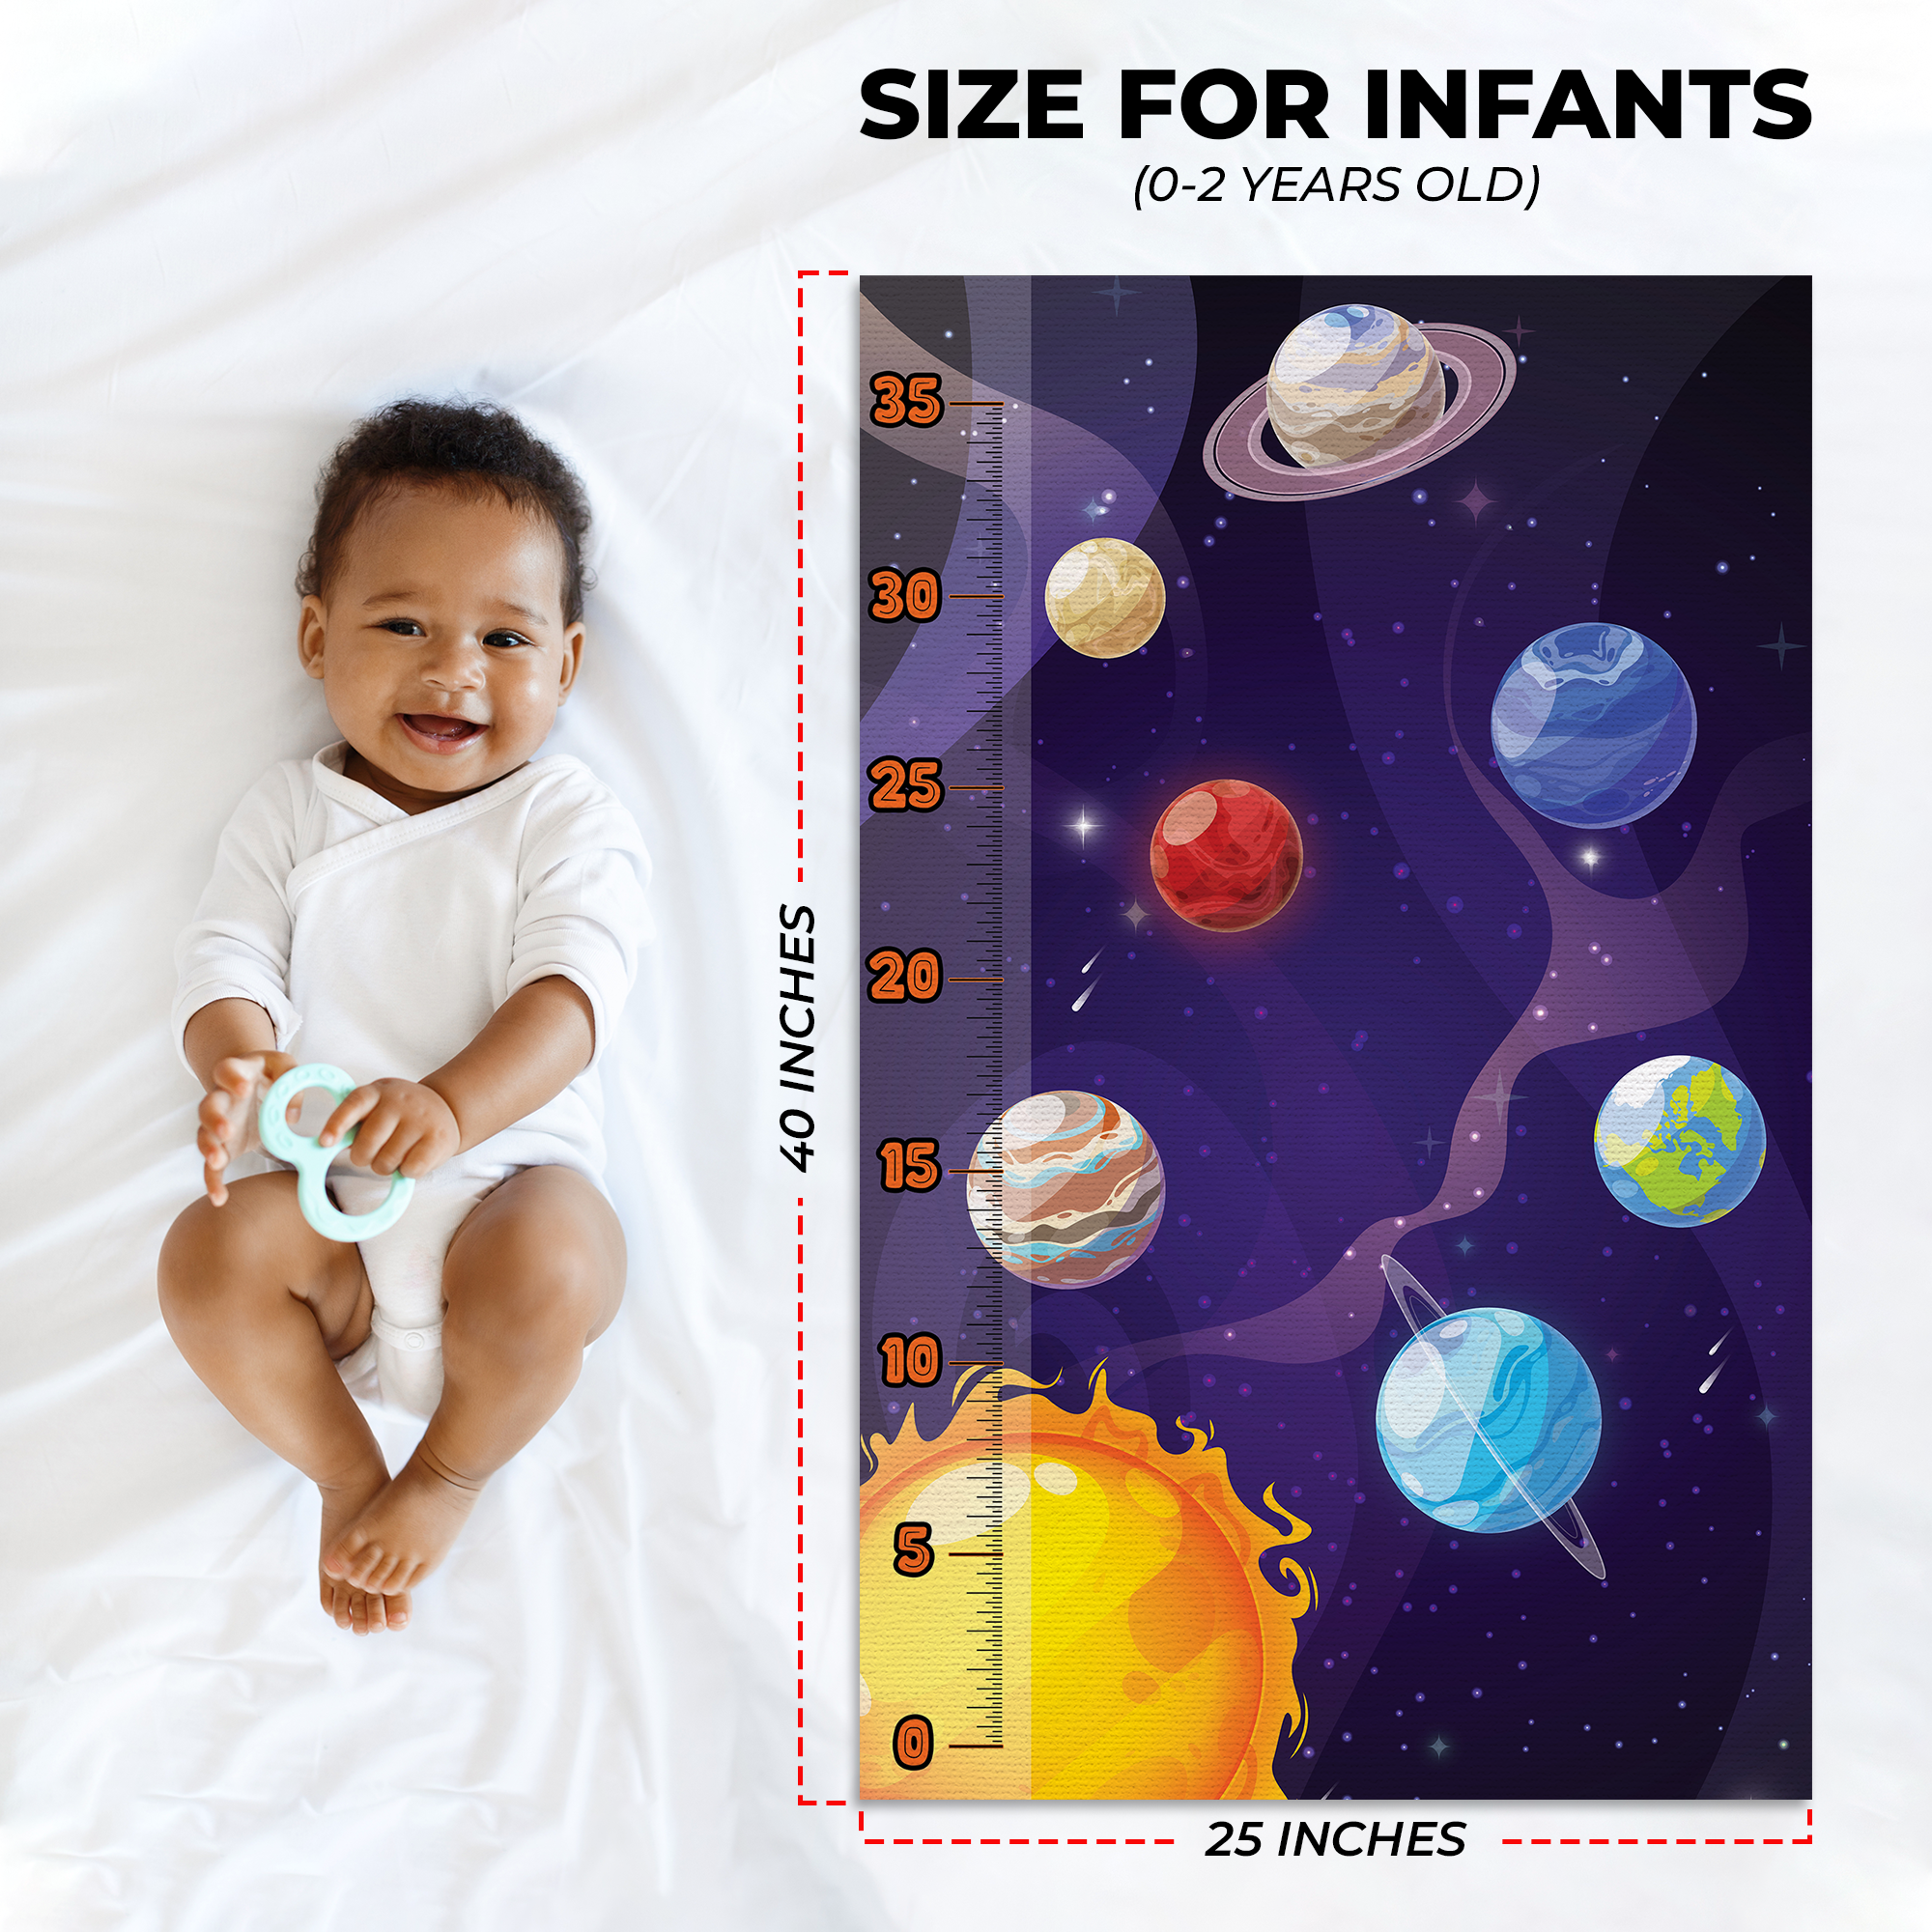 Planets Infant Growth Chart